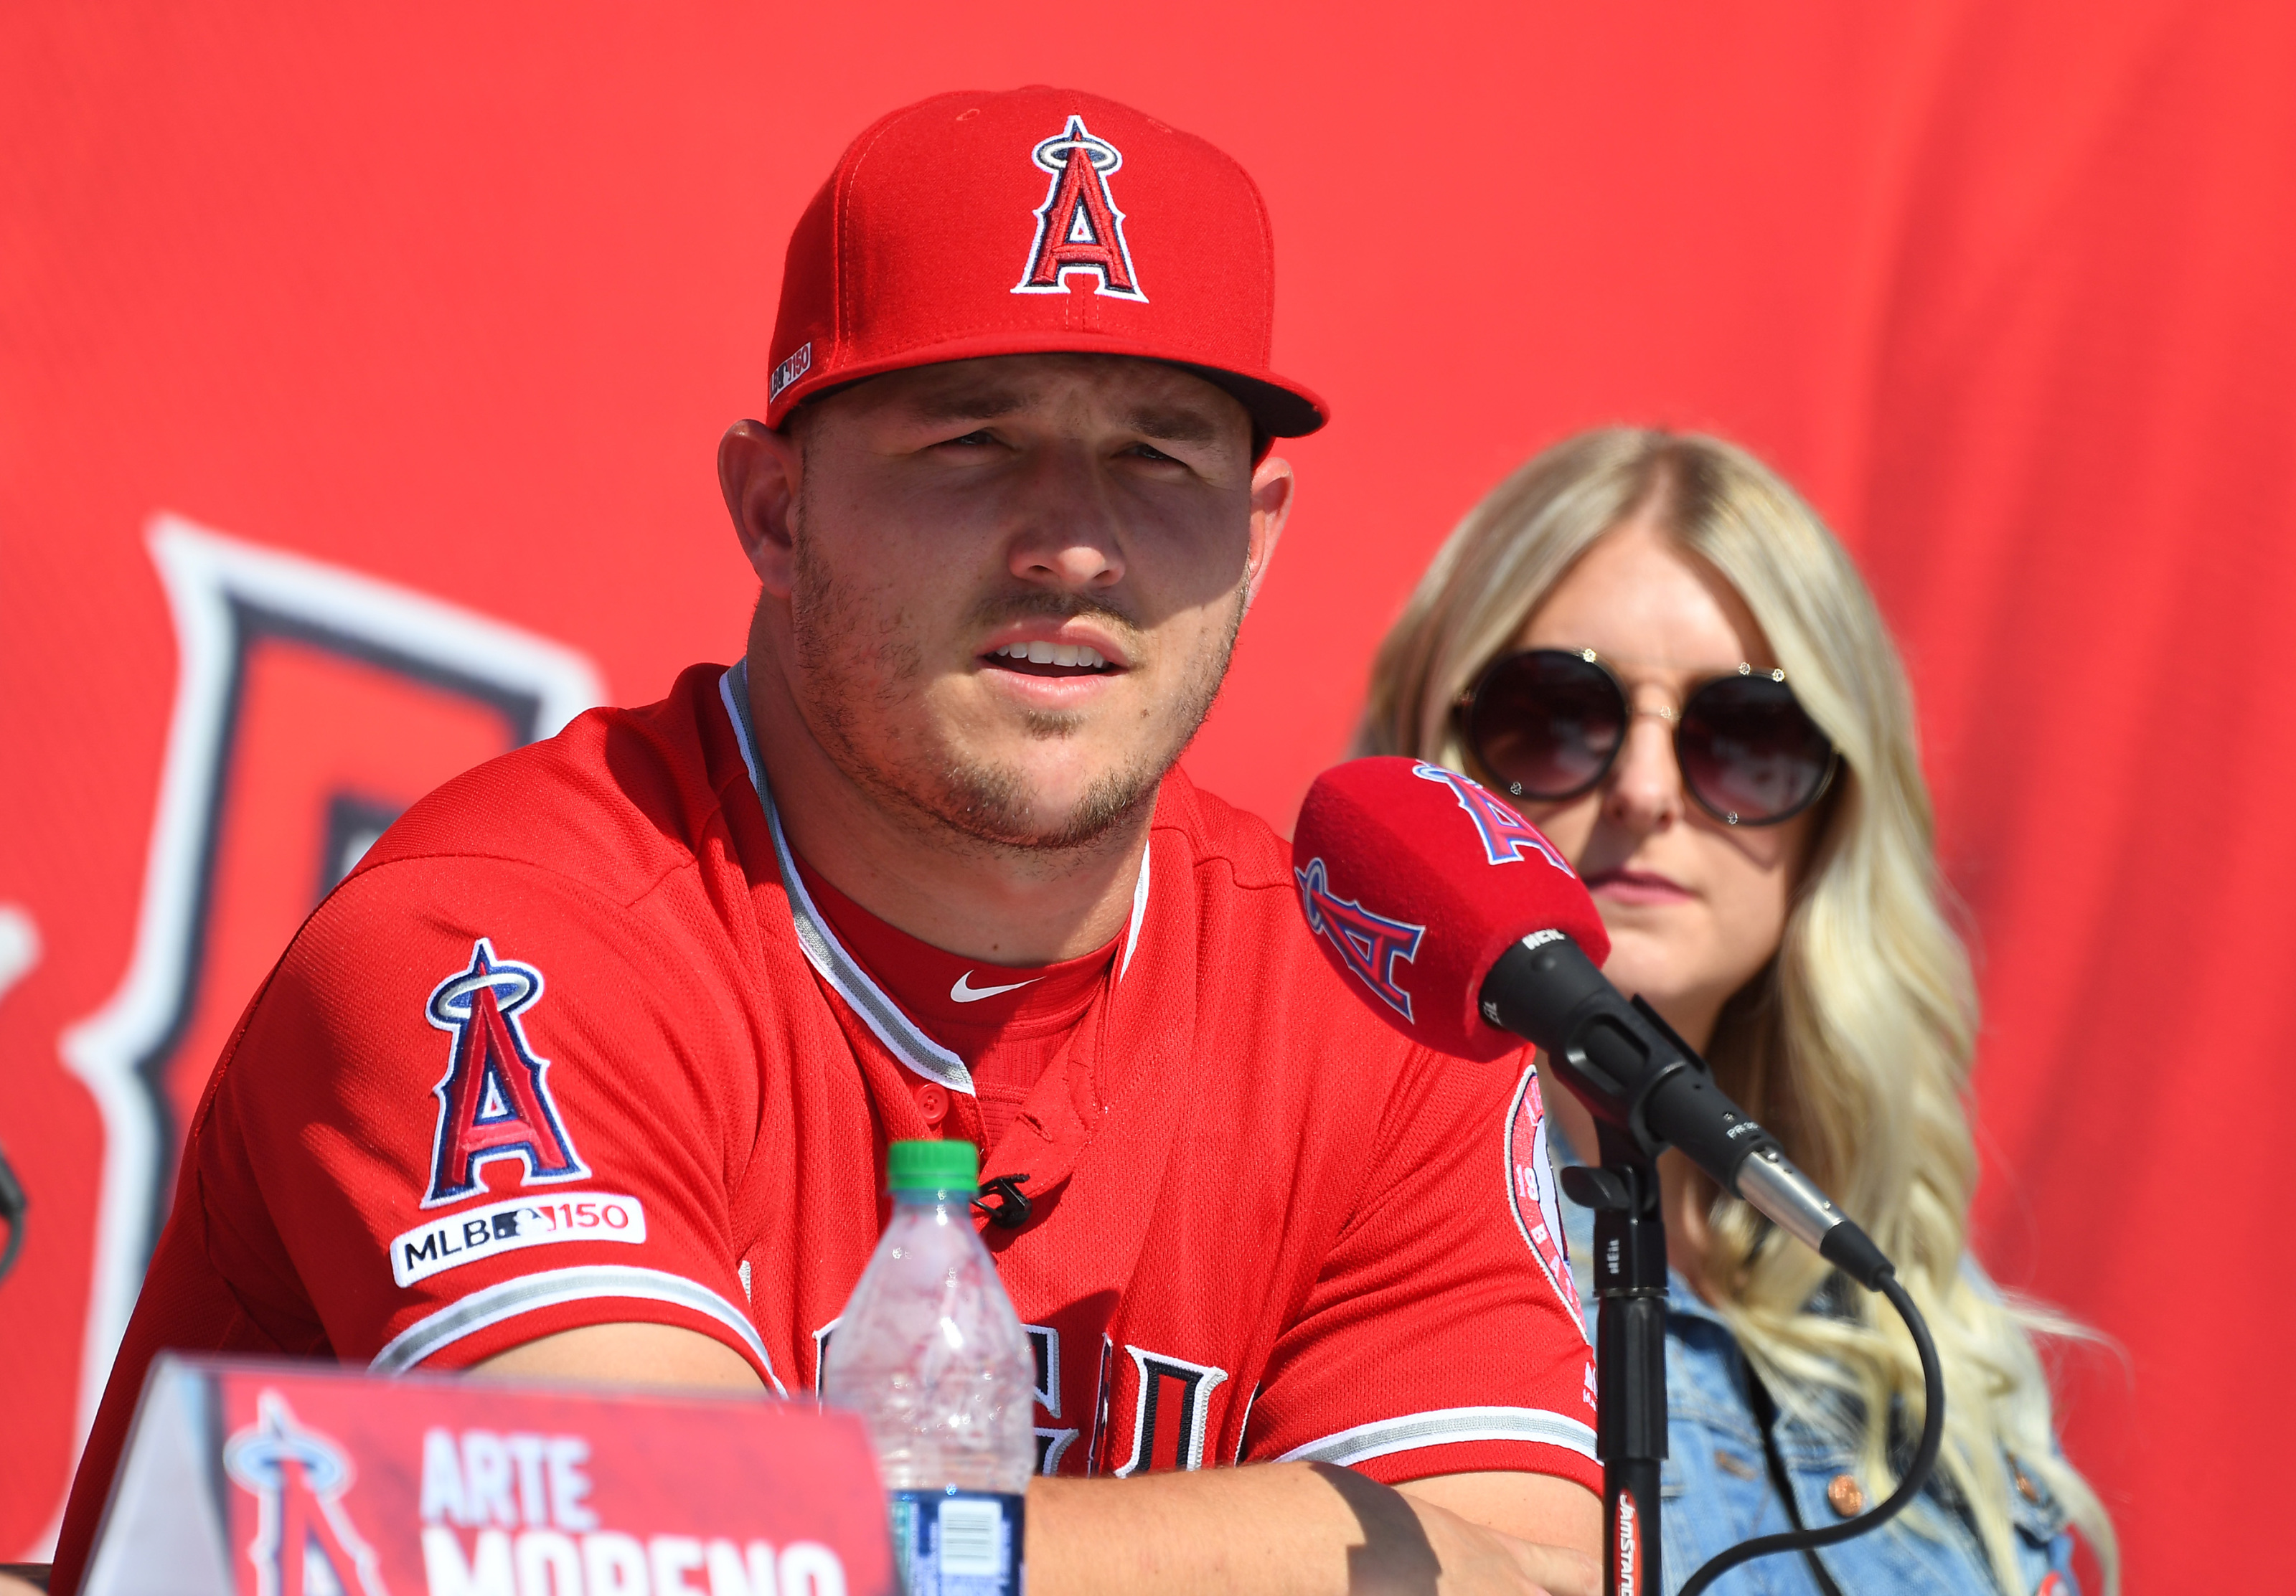 Los Angeles Angels: Mike Trout's new extension is in risk of being voided